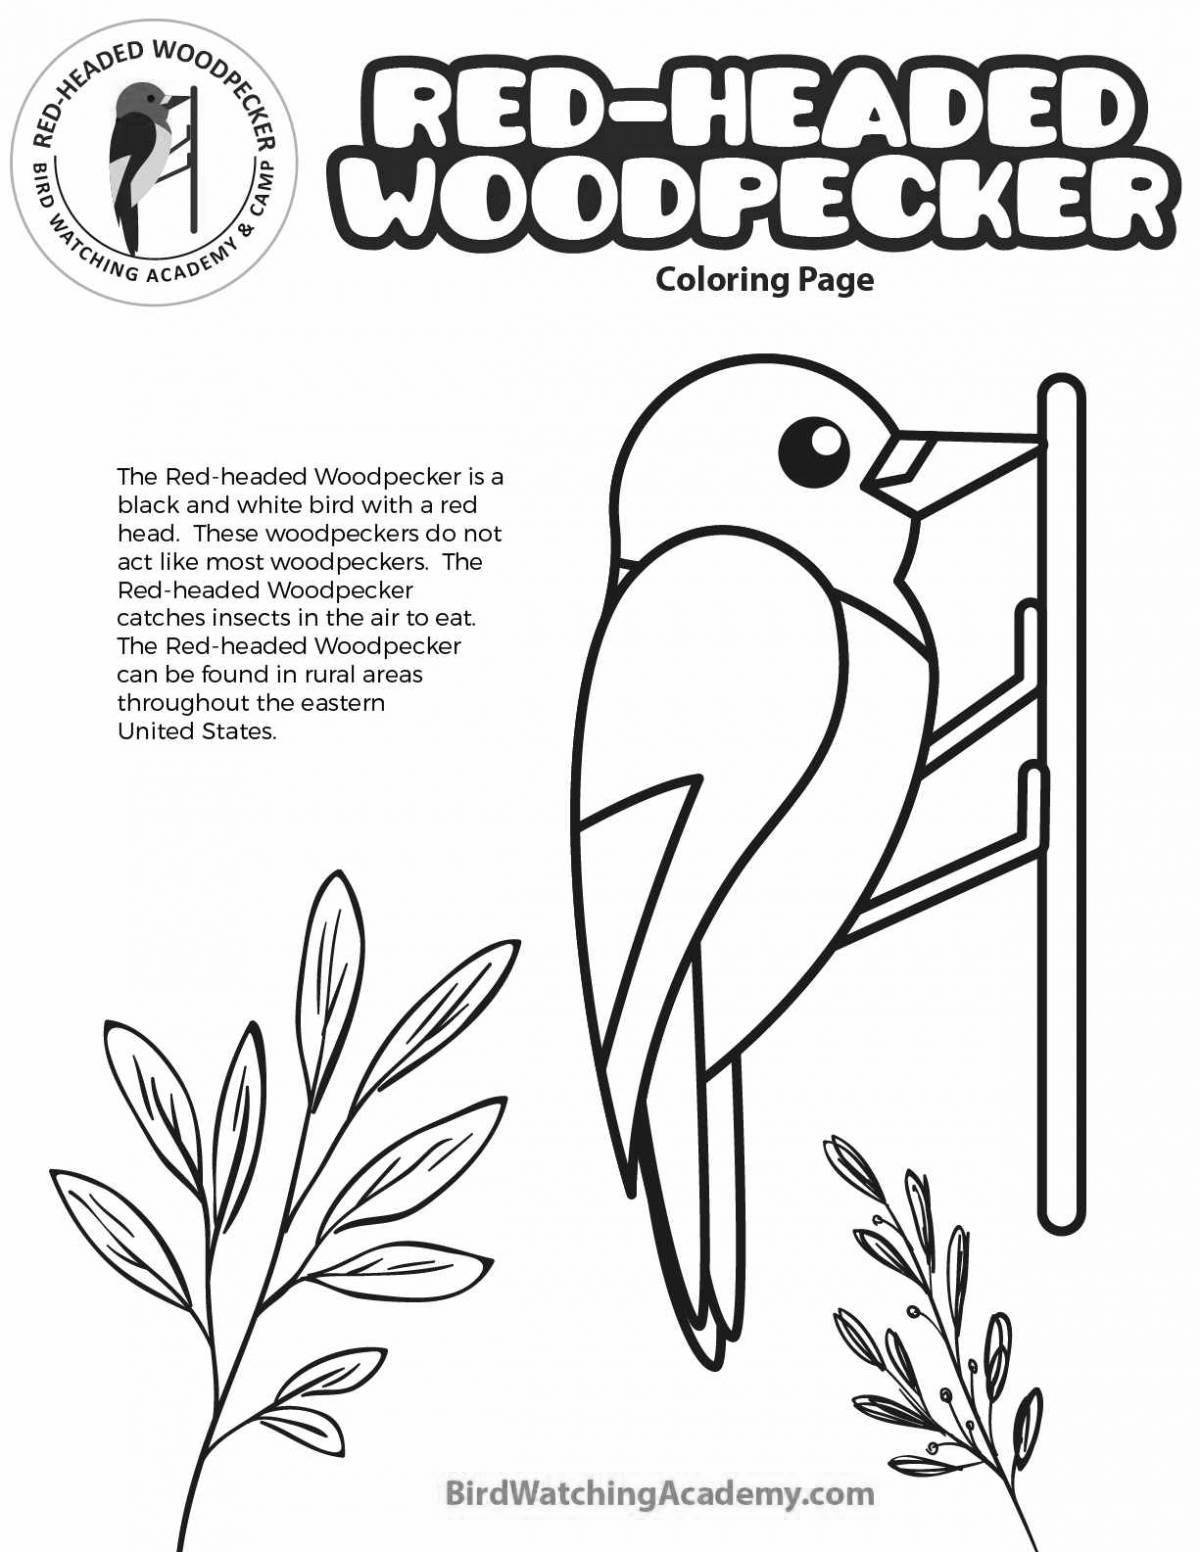 Coloring book glowing woodpecker for children 6-7 years old